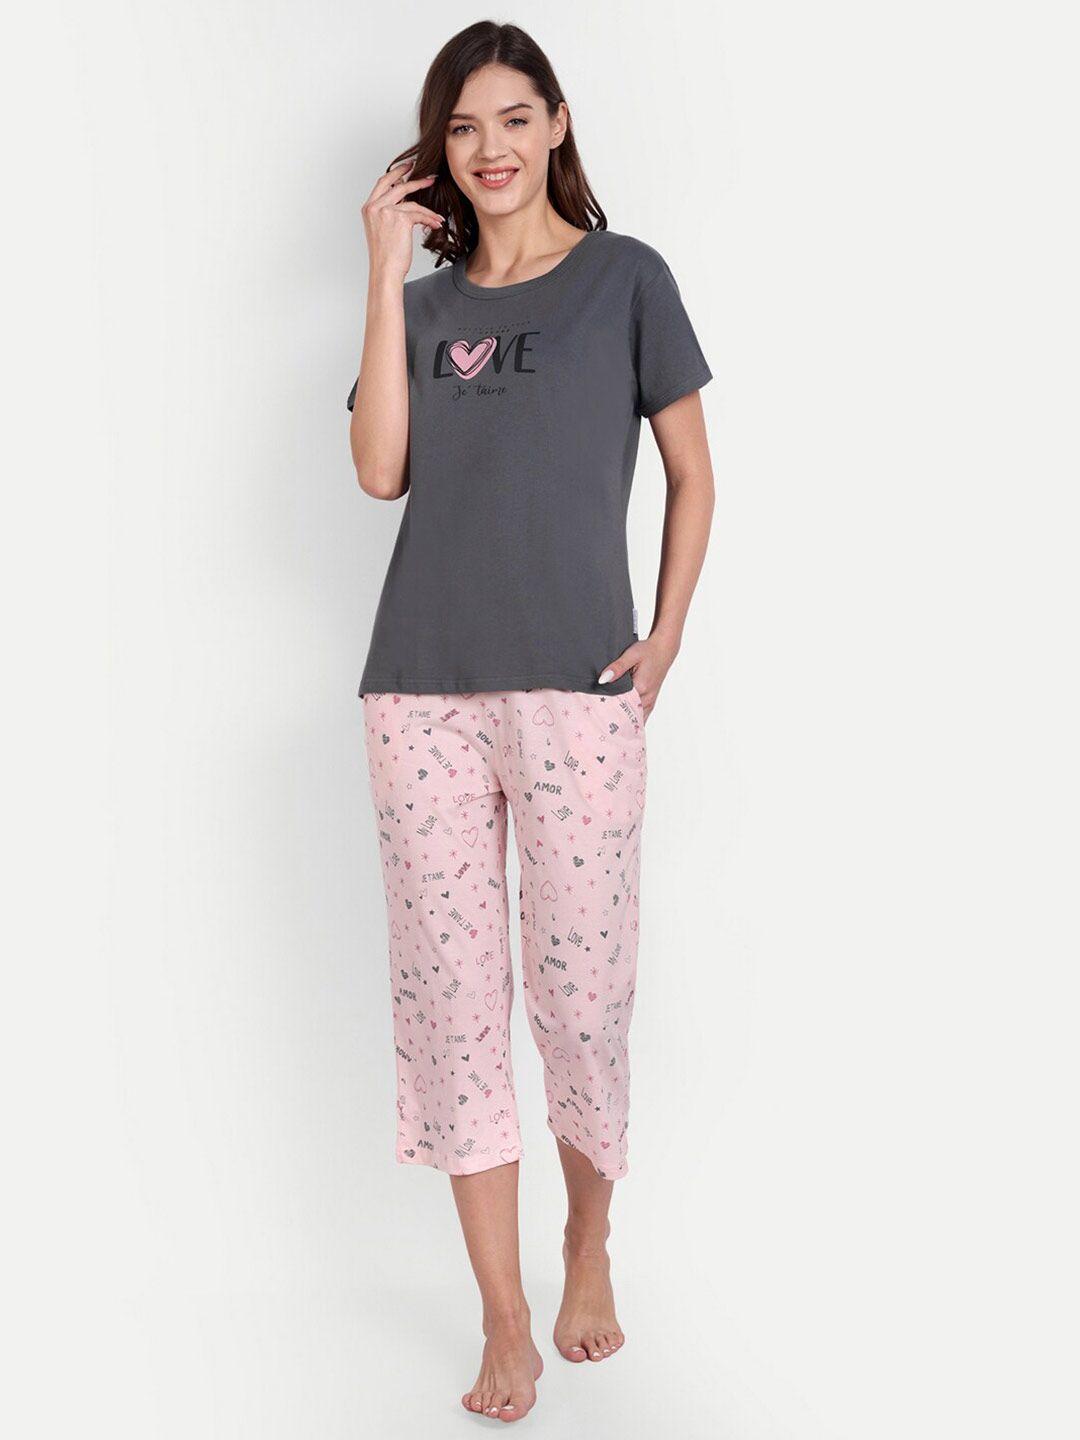 bedtime story typography printed pure cotton t-shirt and capris